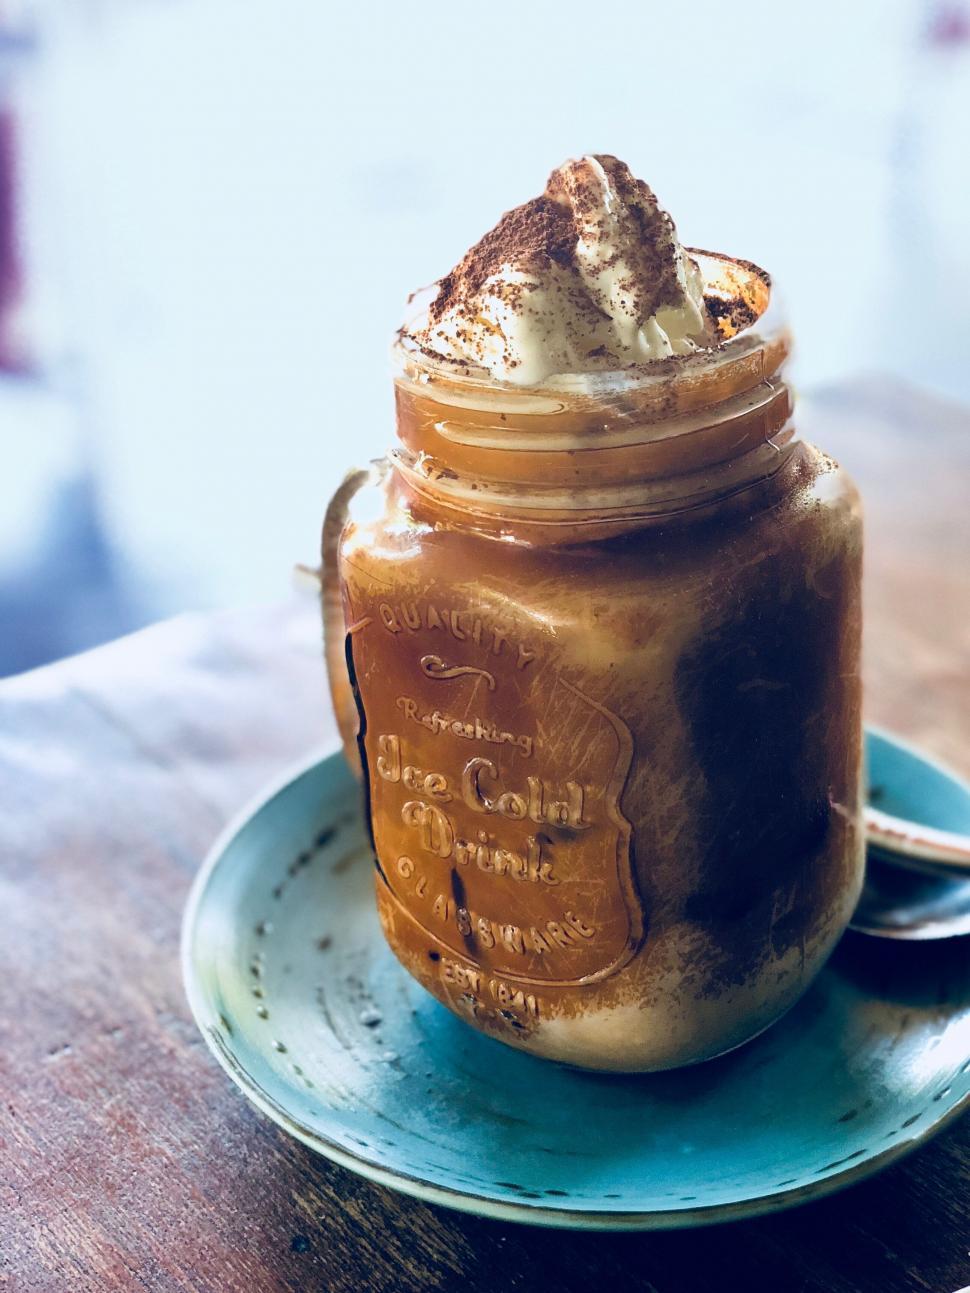 Free Image of Iced coffee in mason jar on blue plate 